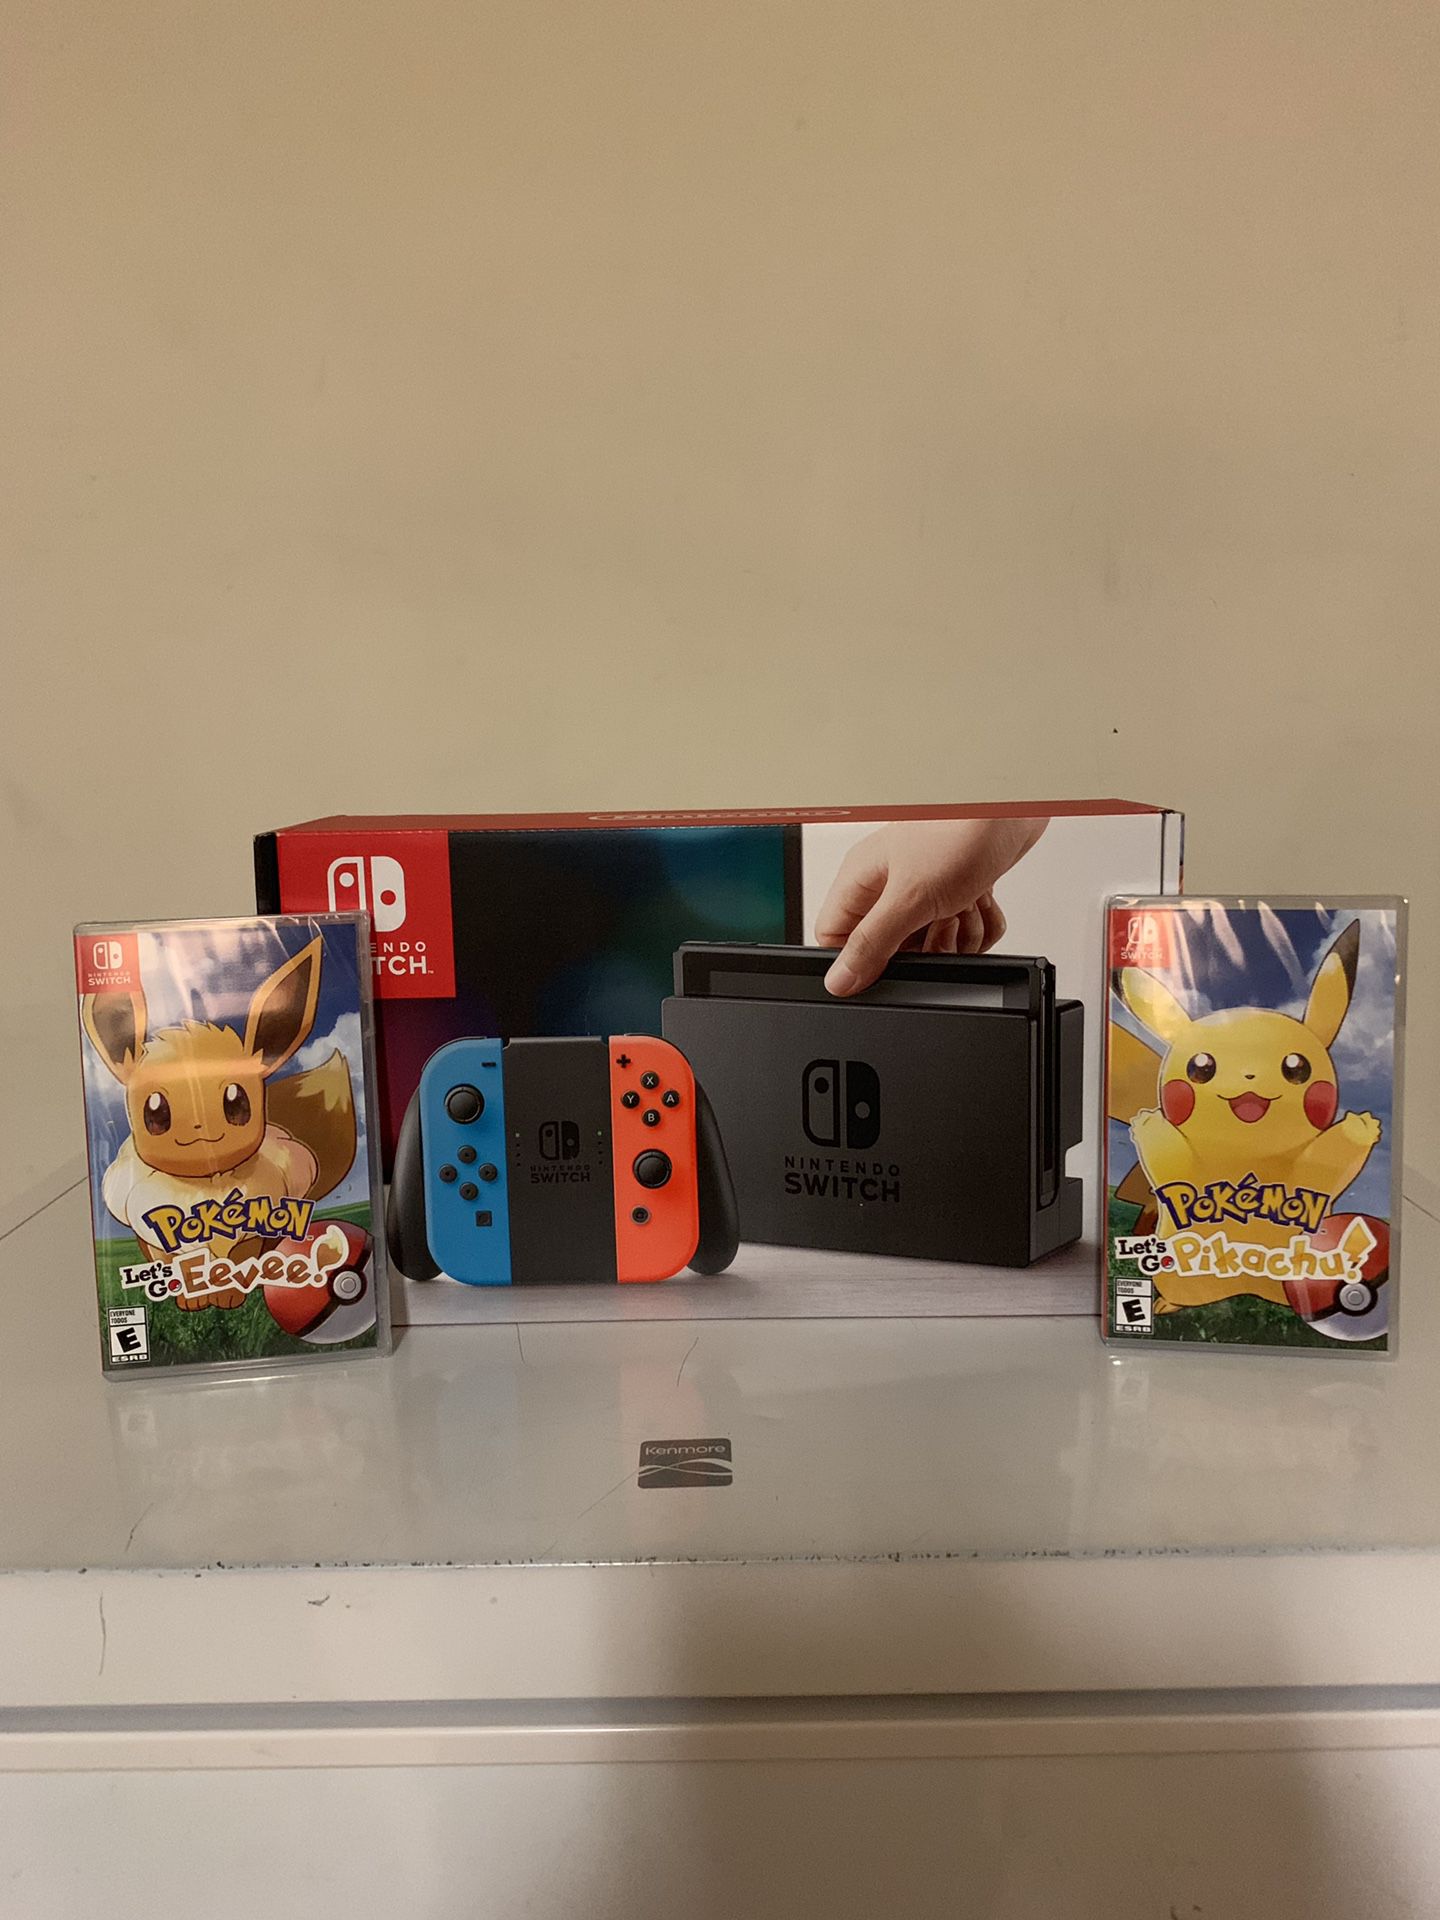 Nintendo Switch/ Pokemon lets go Eevee and lets go Pikachu